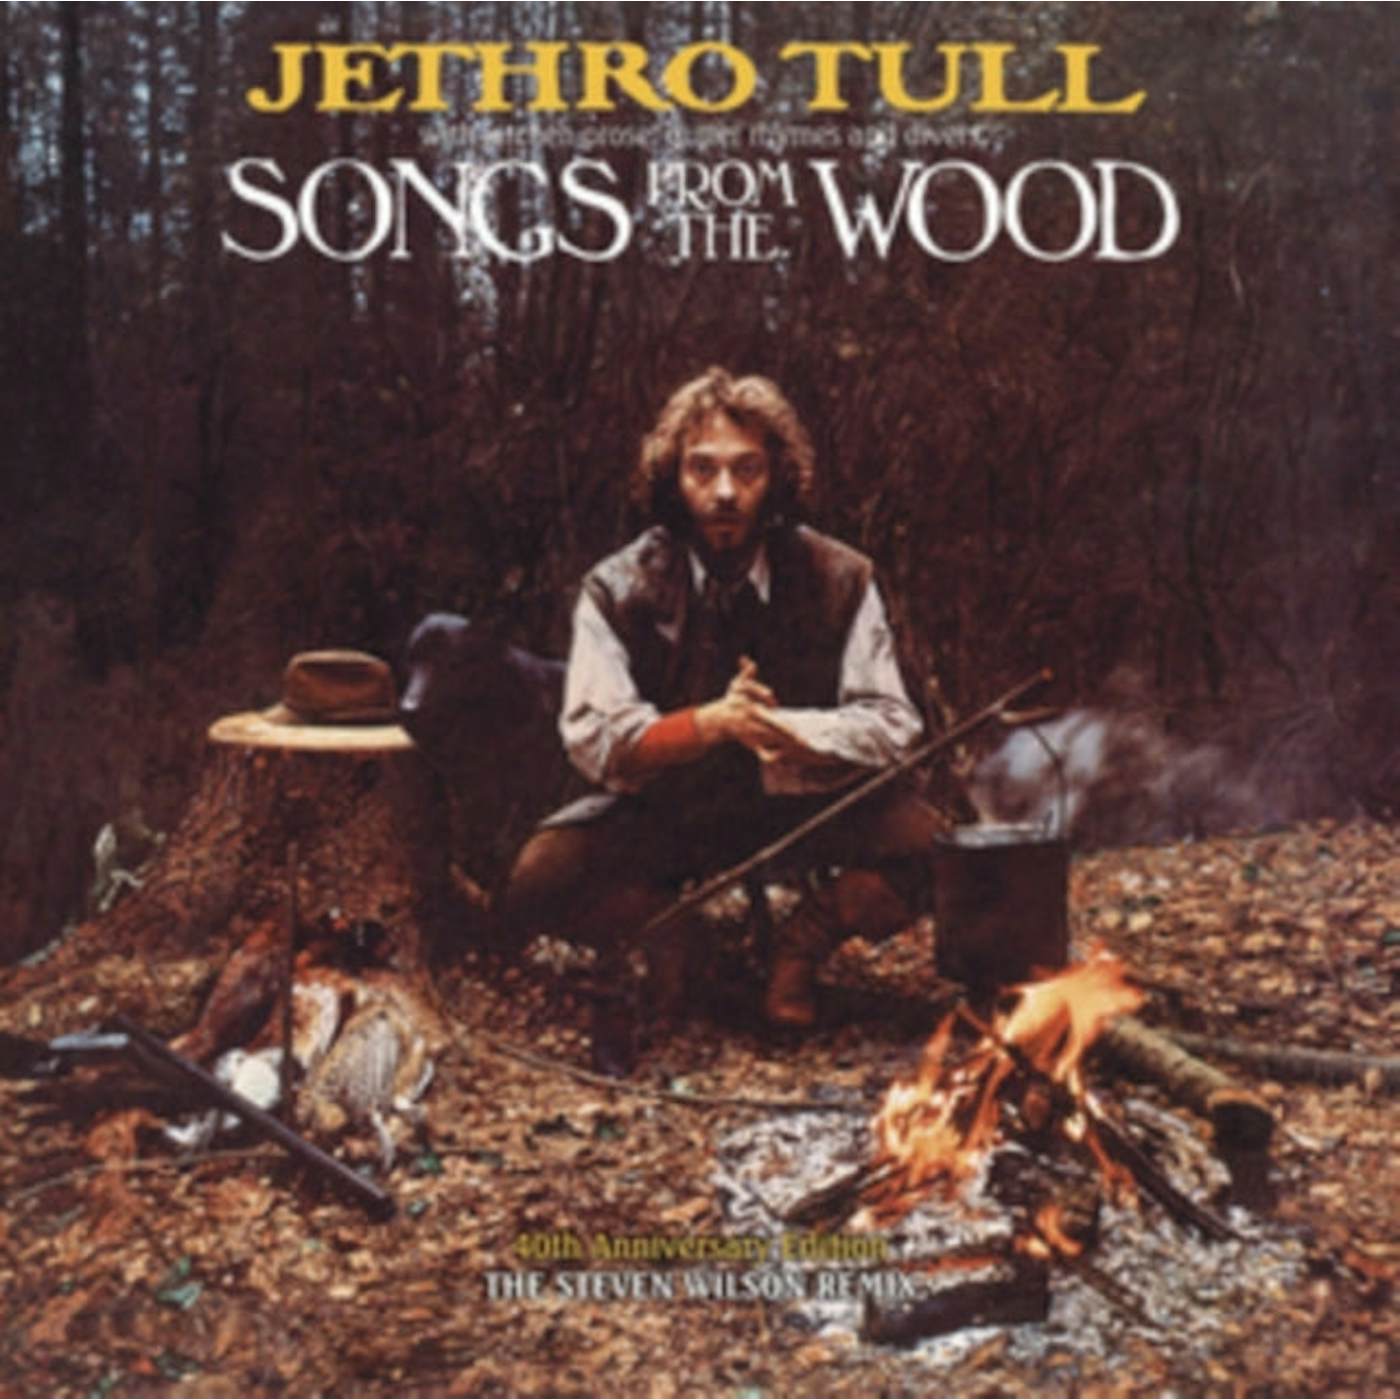 Jethro Tull LP Vinyl Record - Songs From The Wood (40th Anniversary Edition) (The Steven Wilson Remix)